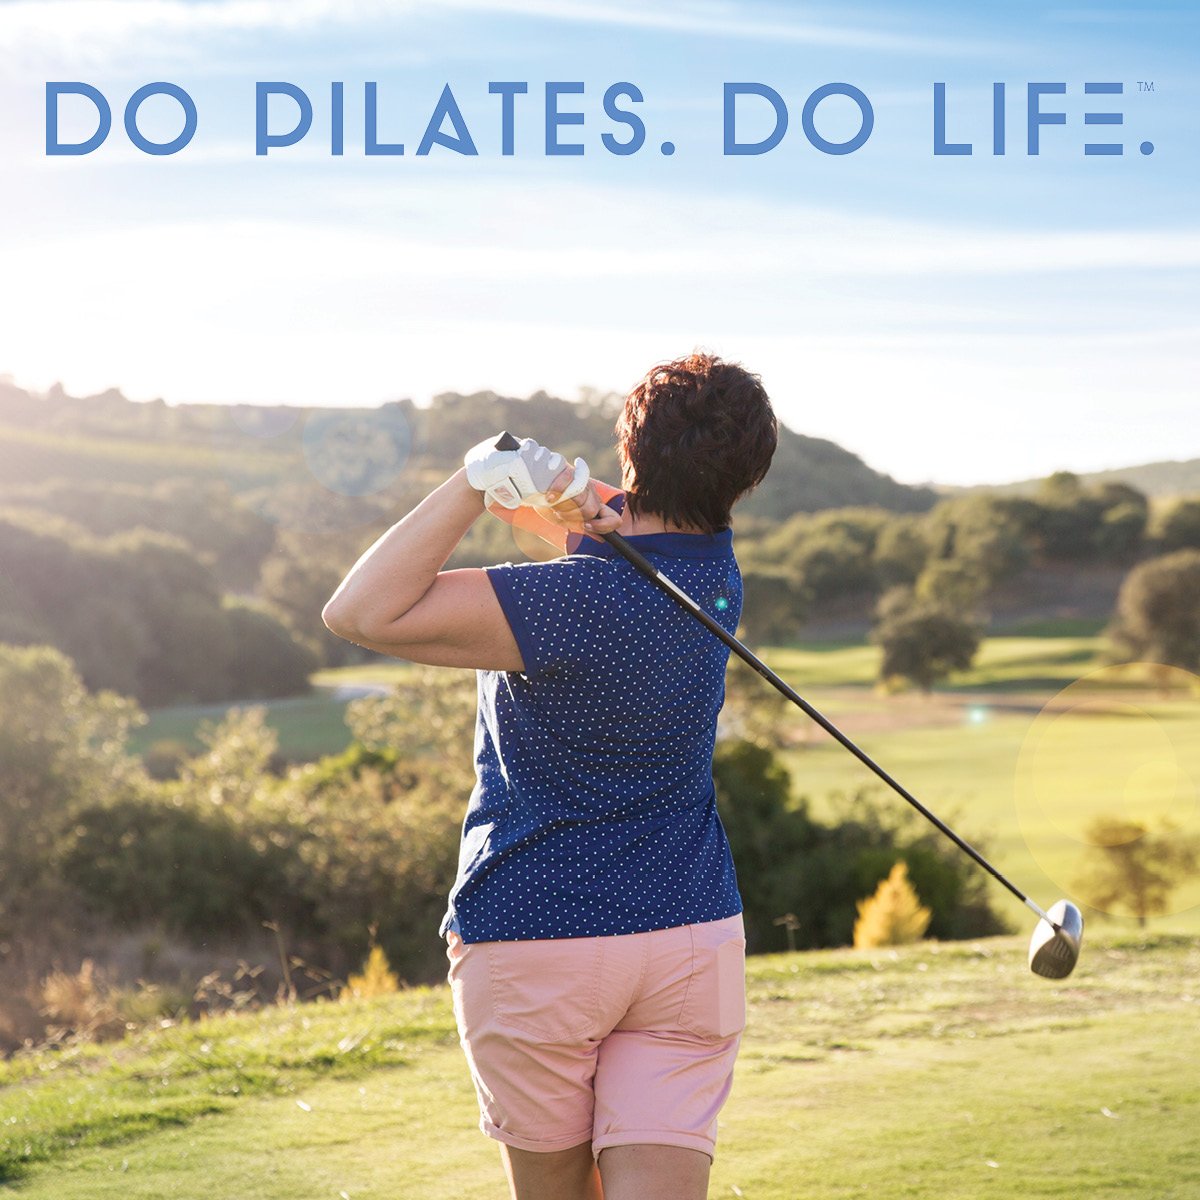 #NationalGolfMonth Pilates is based on movement from the center of the body, as is your golf swing. Core strength can improve hip rotation, range of motion in the shoulders and back stability leading to more powerful and accurate shots.

#golf #golfer #golfworkout #golfwarmup